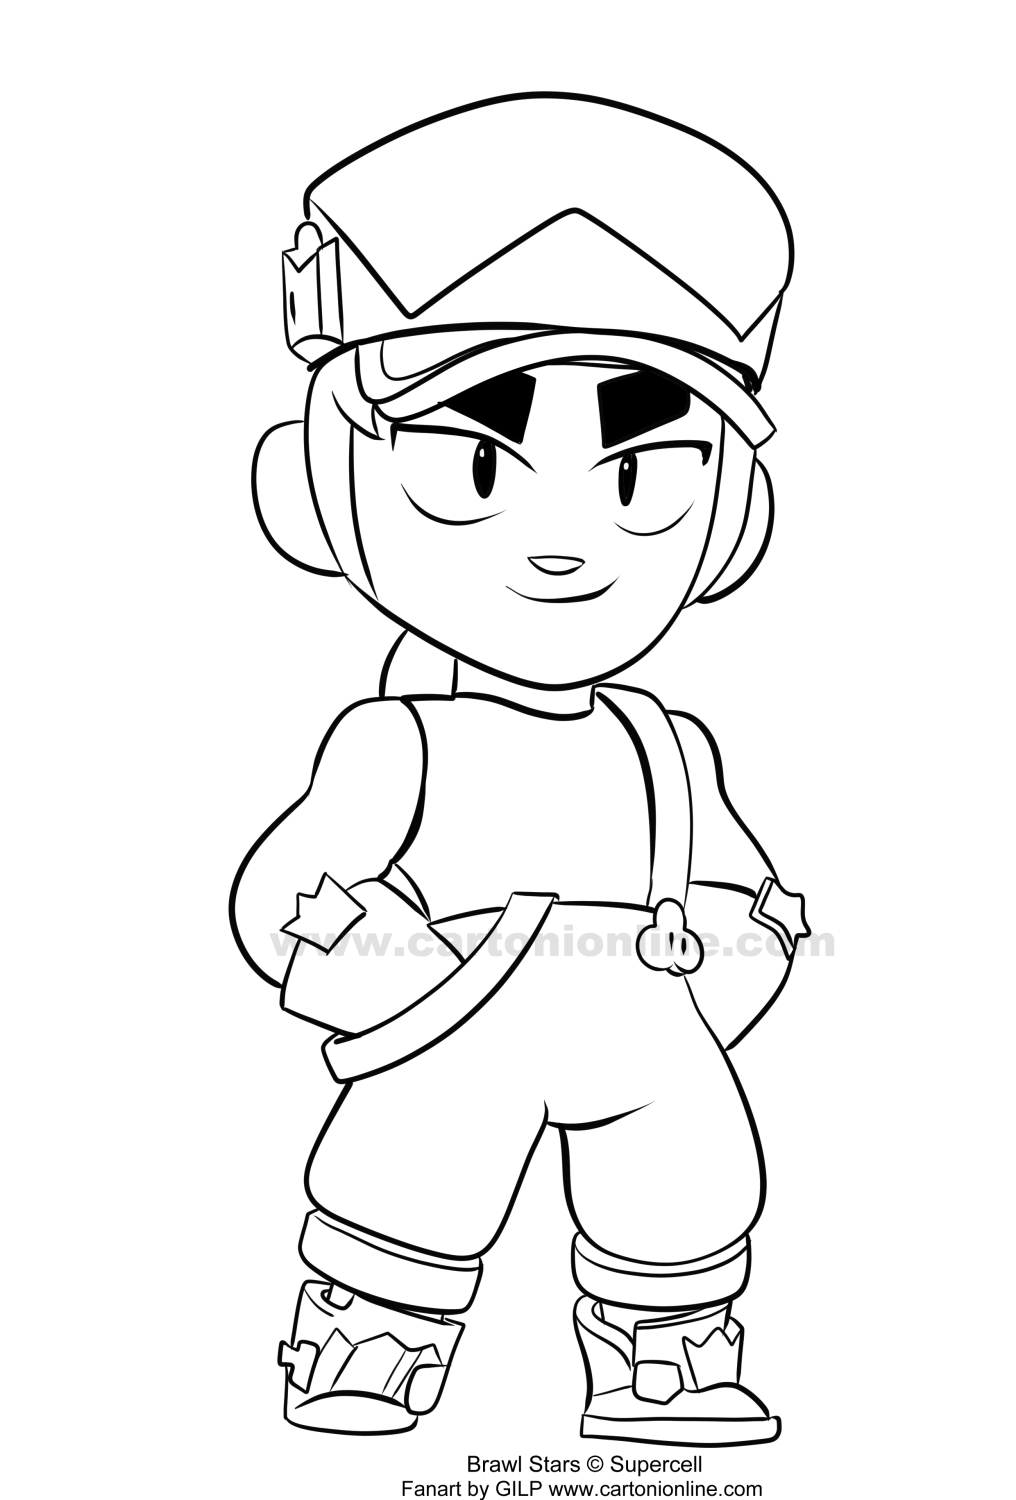 Fang 01 from Brawl Stars coloring page to print and coloring